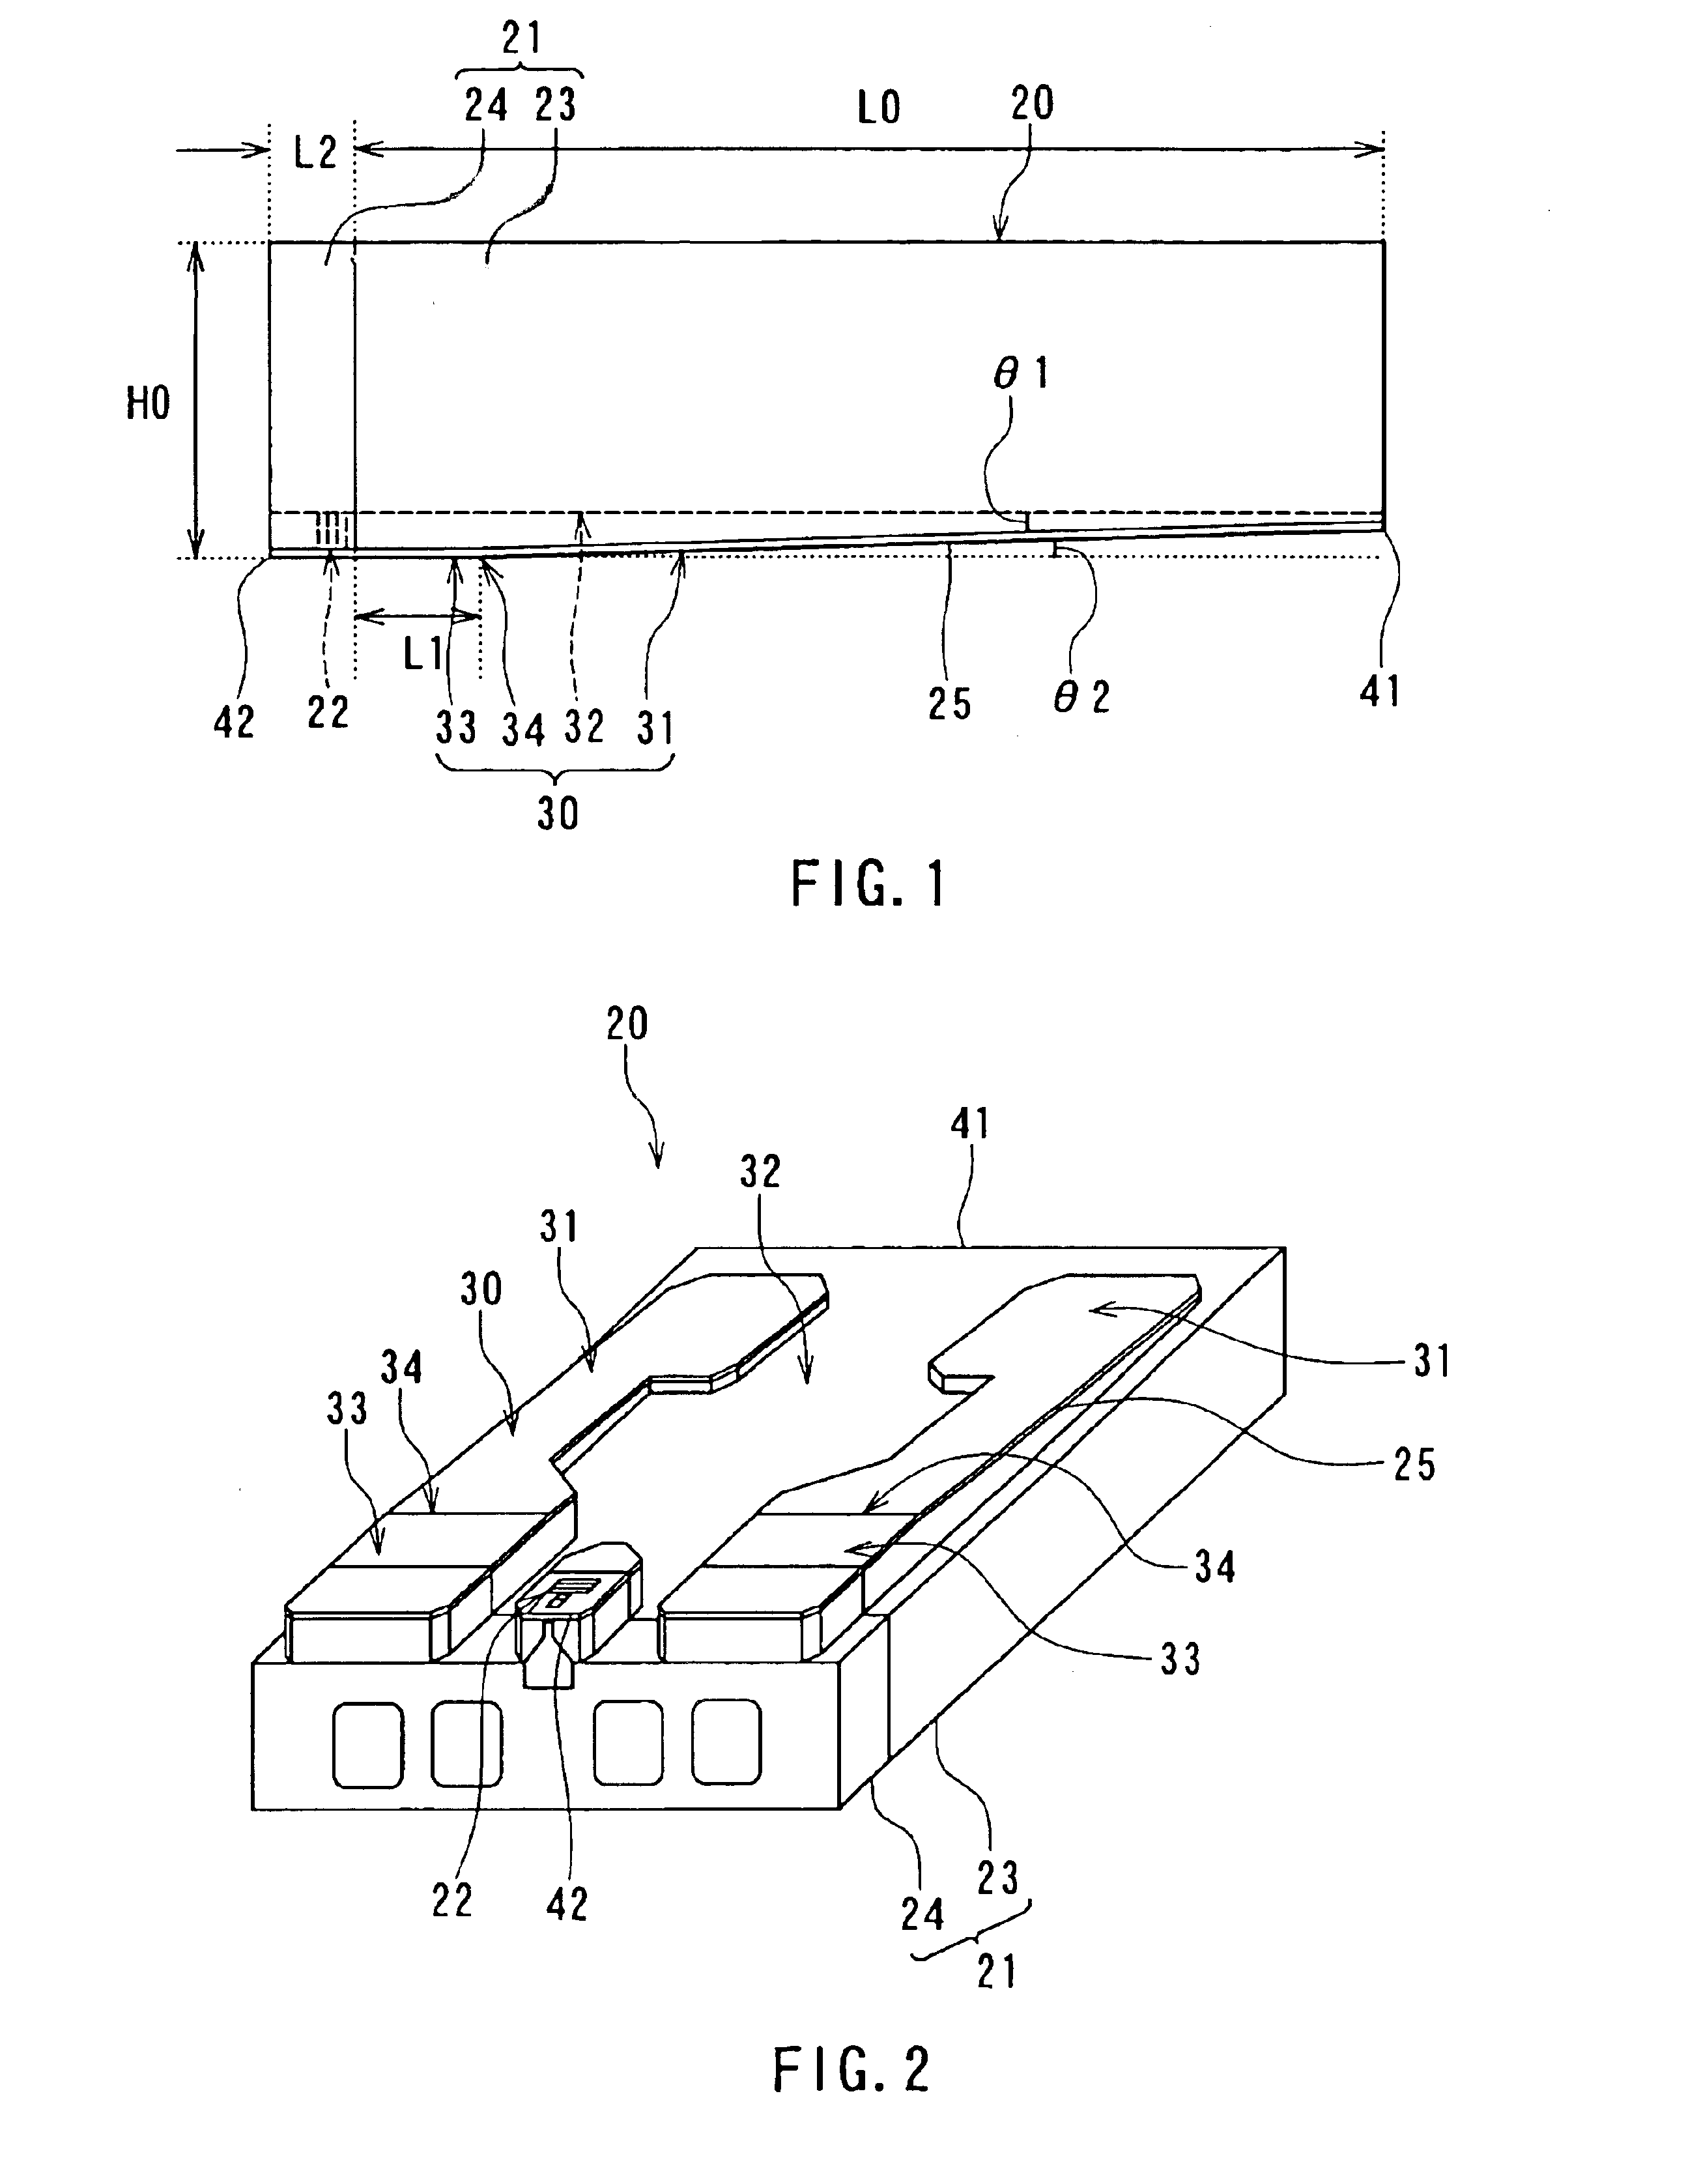 Slider of thin-film magnetic head and method of manufacturing same